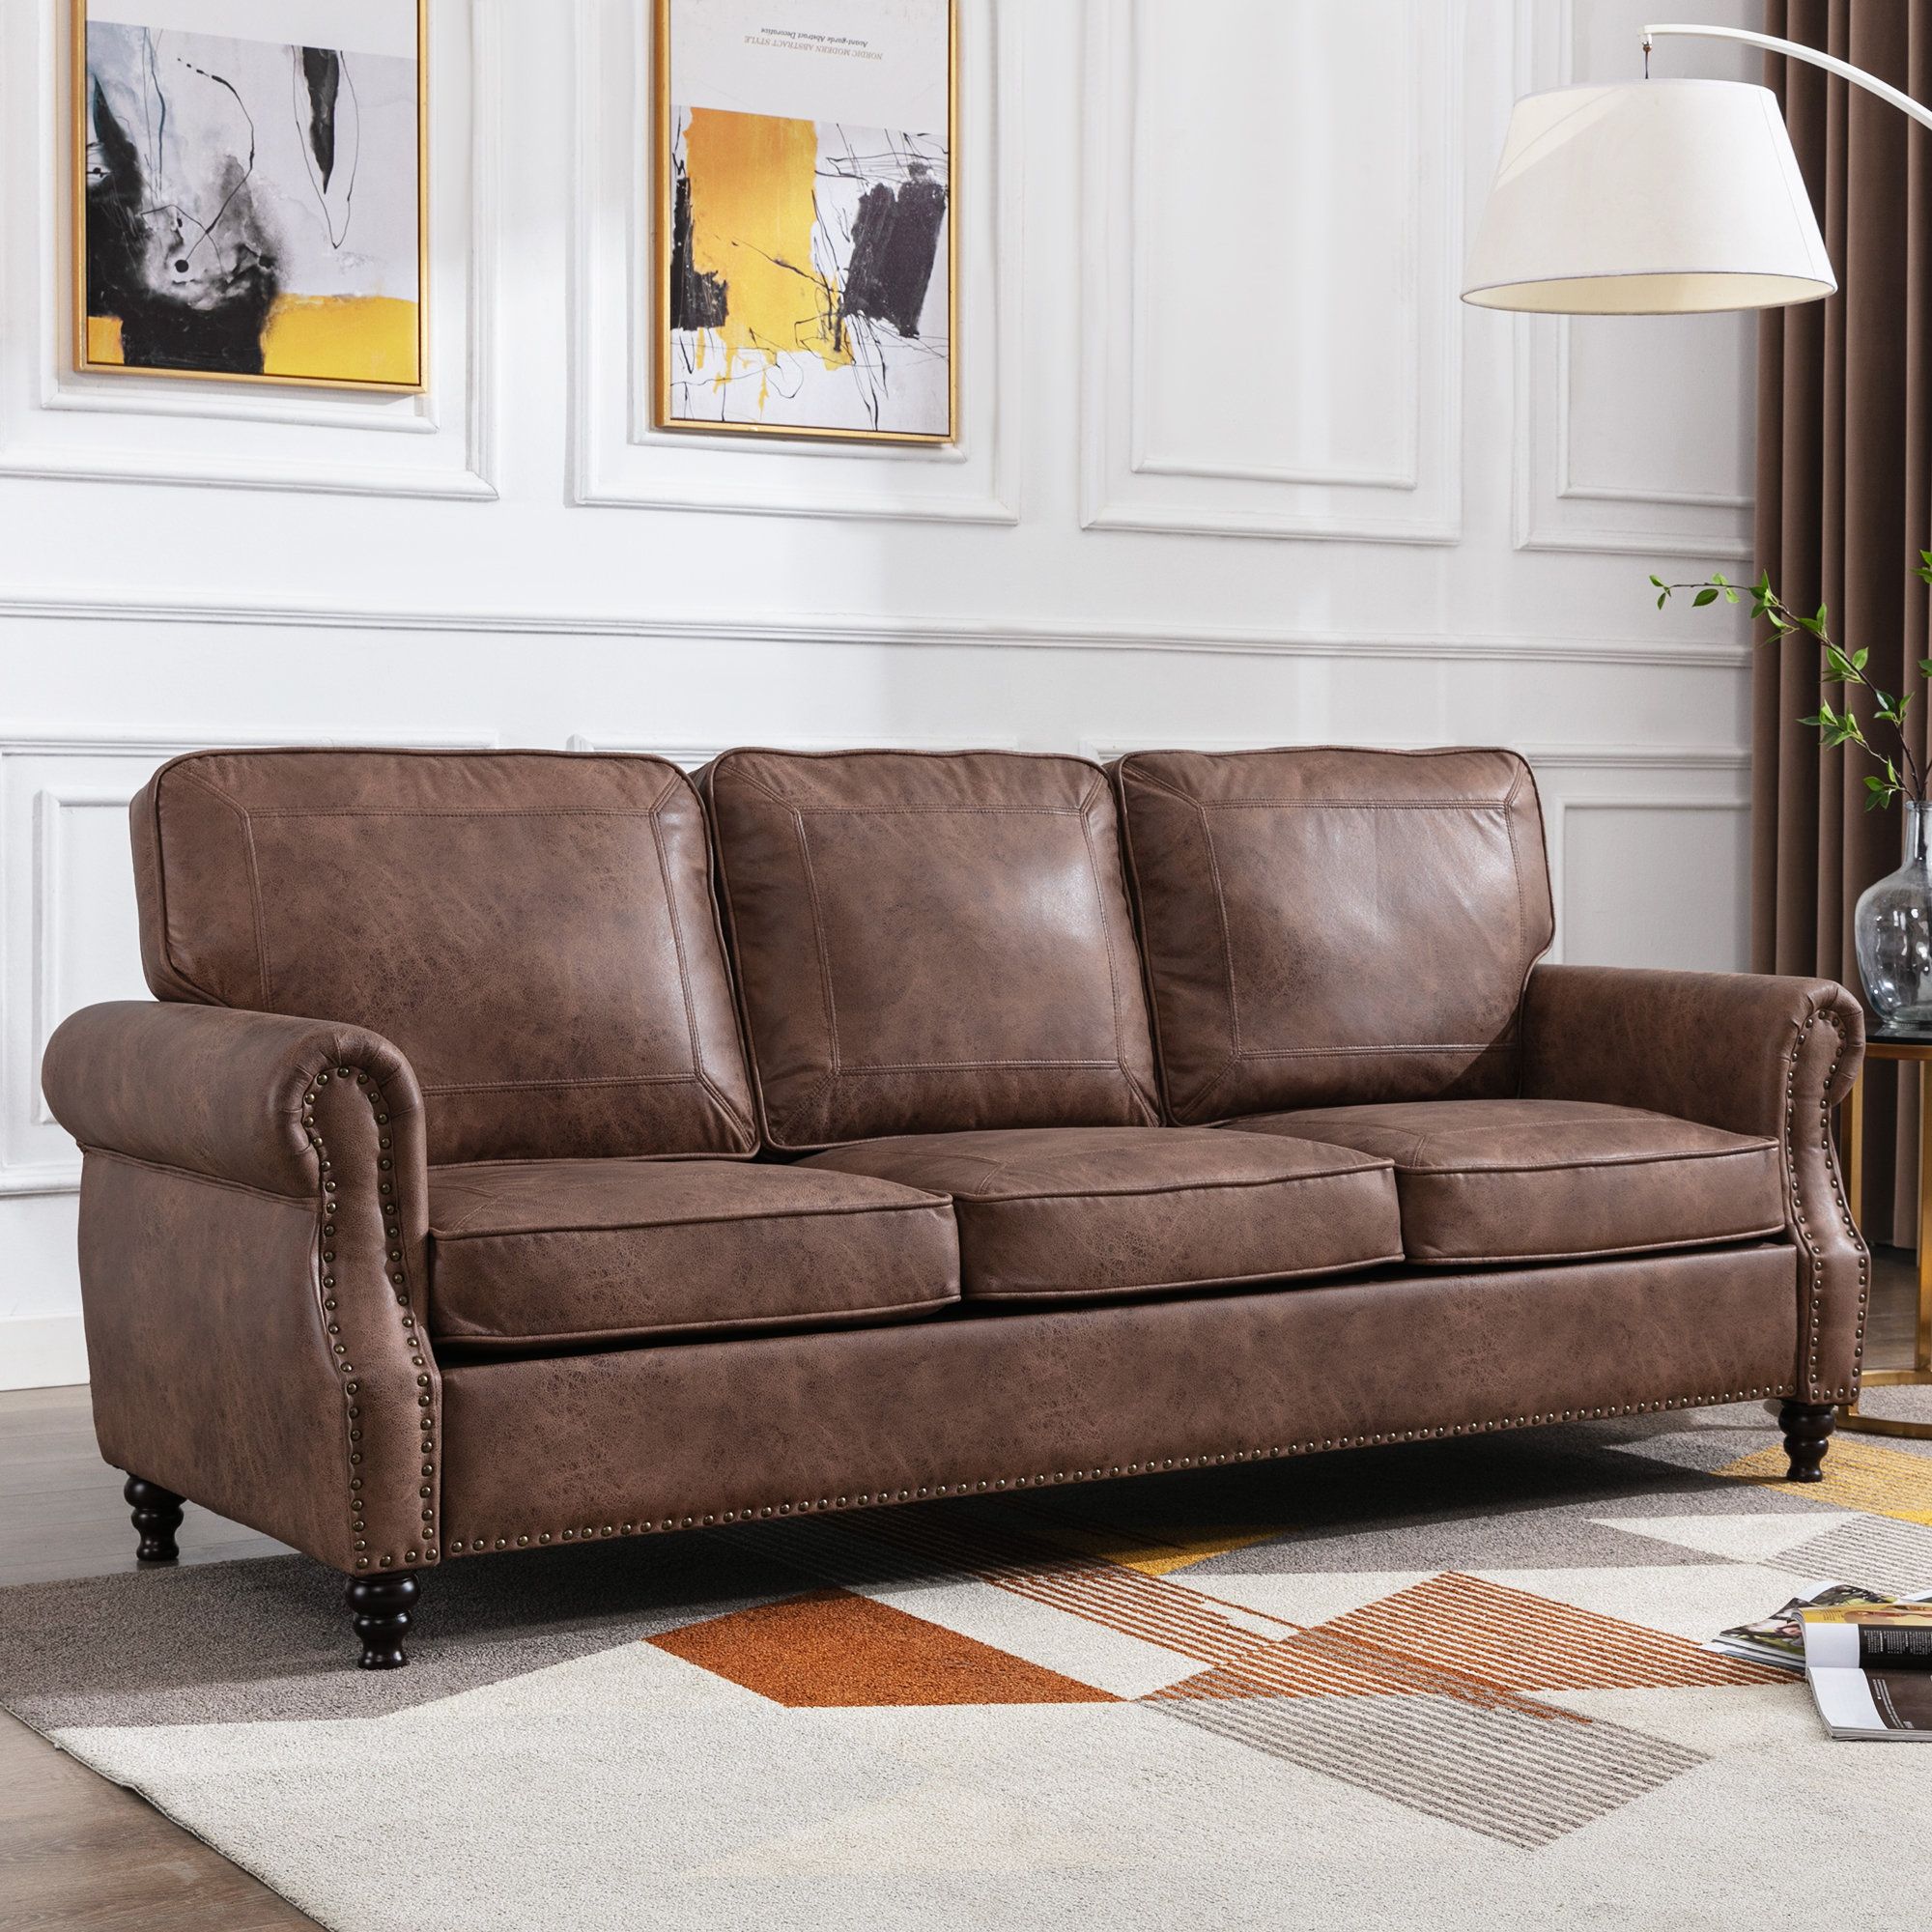 Lark Manor Amarius 80" Wide Faux Leather Rolled Arm Sofa & Reviews | Wayfair With Faux Leather Sofas In Chocolate Brown (View 6 of 15)